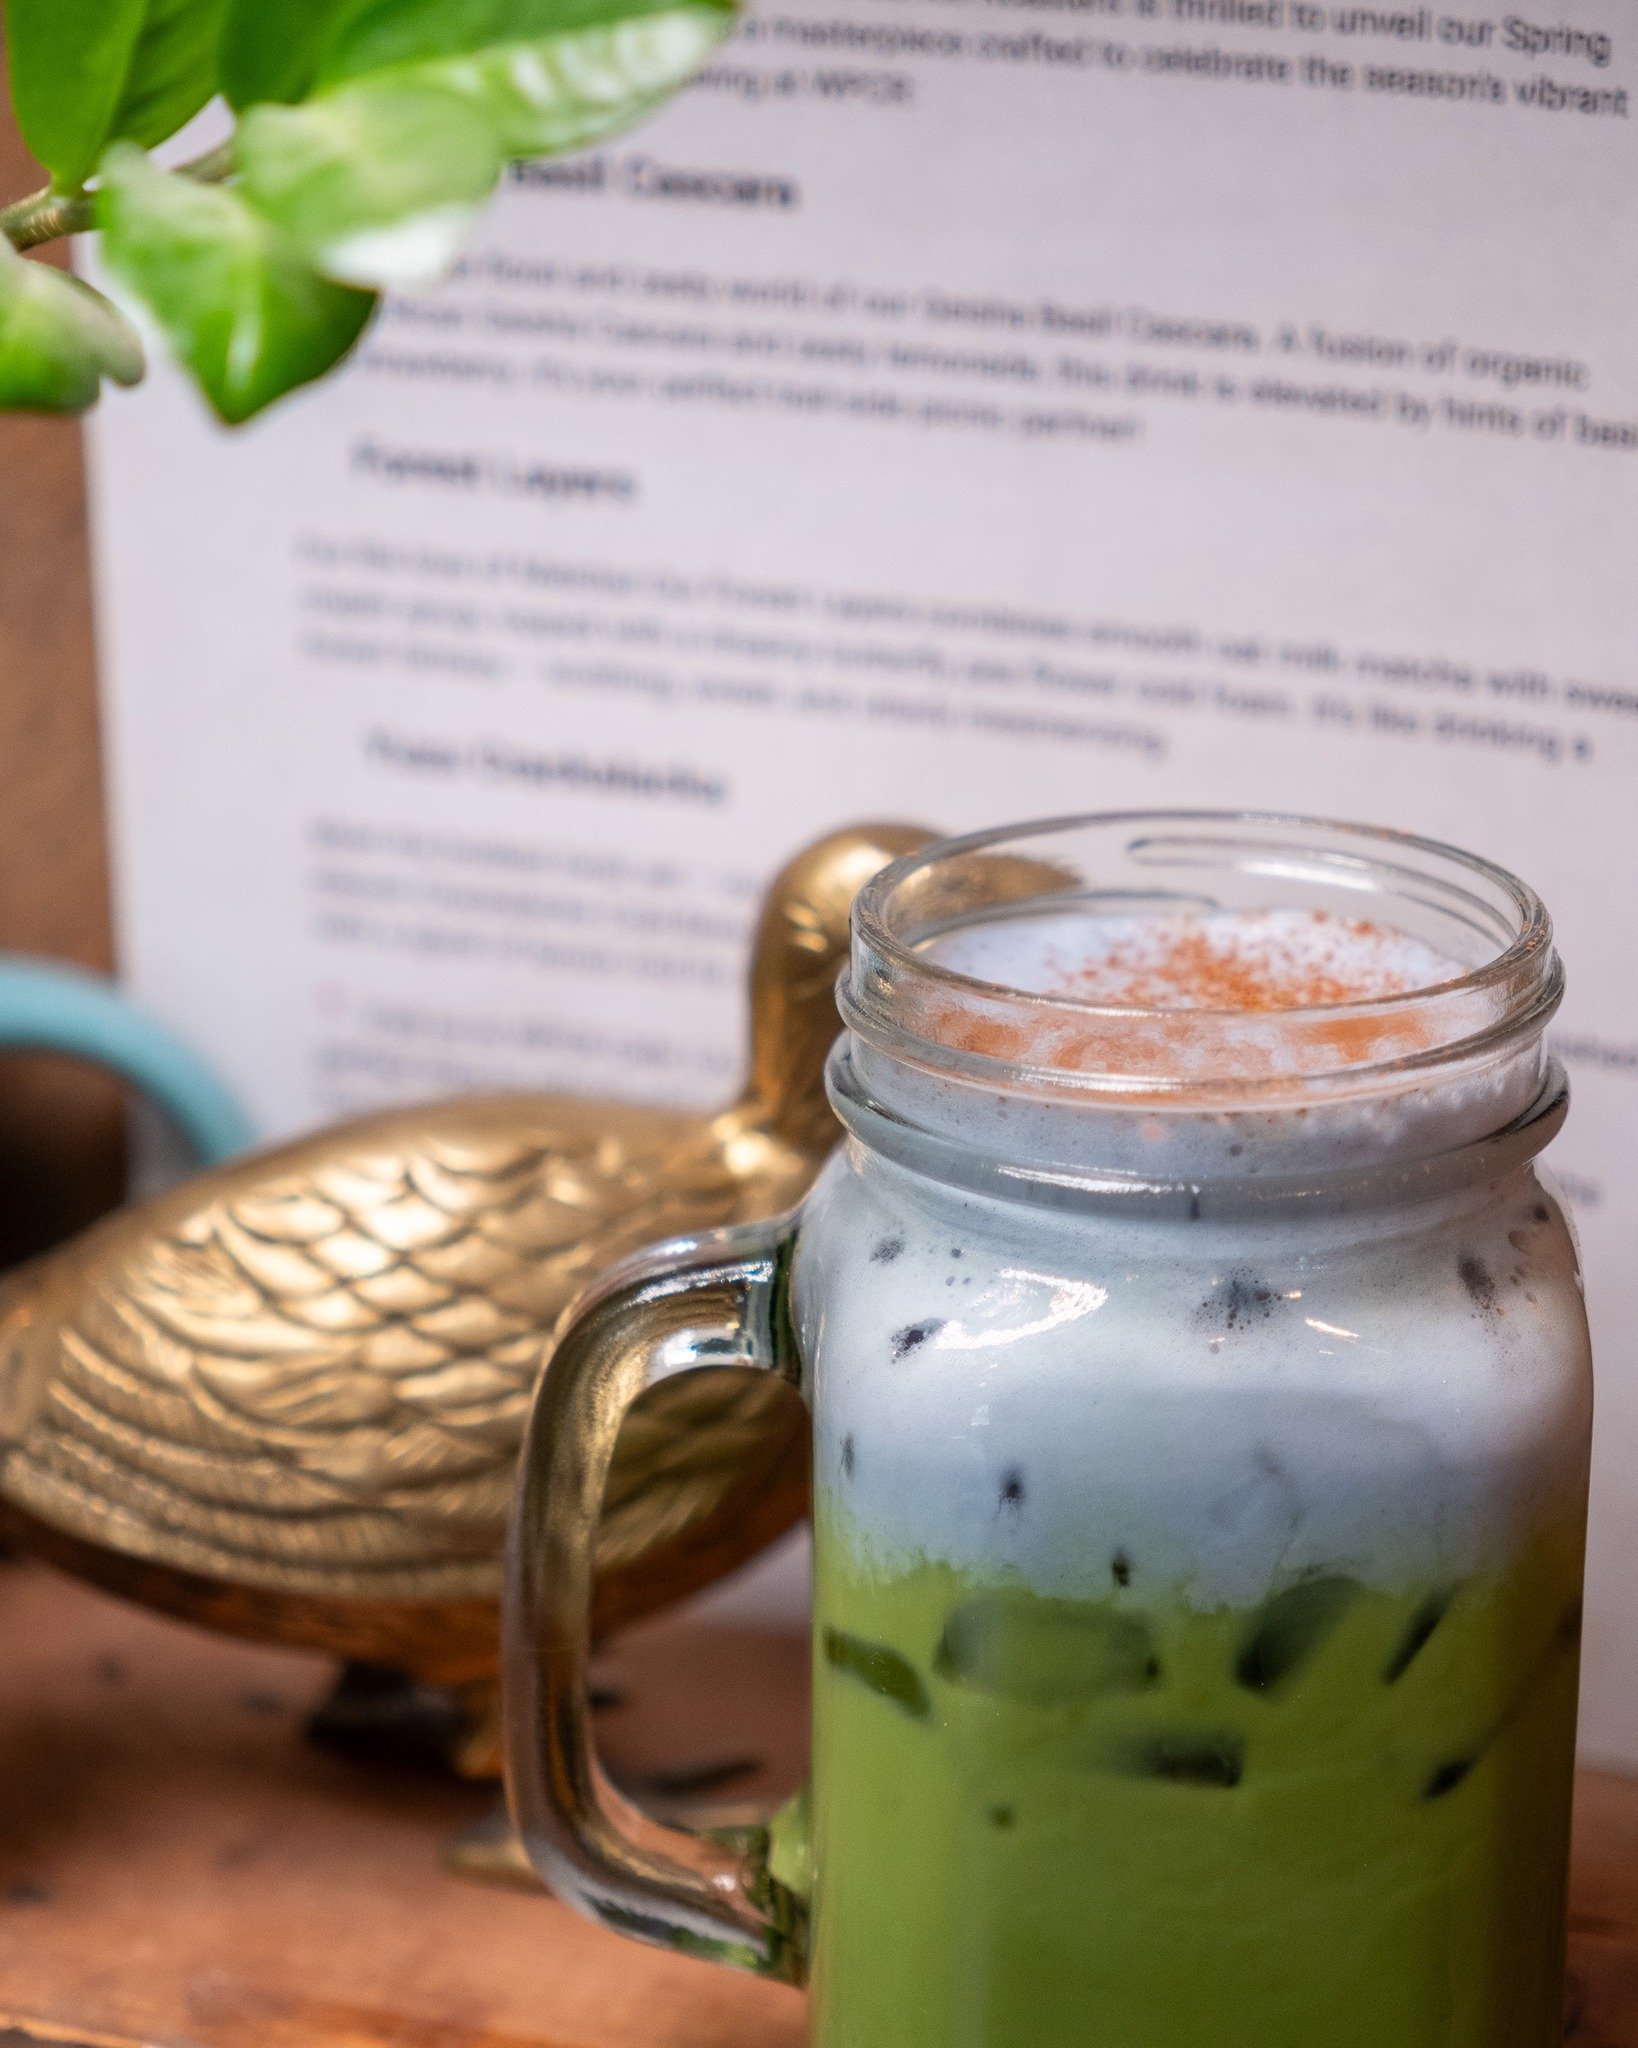 Calling all matcha lovers! Repeat, calling all matcha lovers! Our WPCR Oxford Cafe has just the drink for you! Our newest spring special, Forest Layers, is a delicious combination of smooth oat milk, and organic matcha, sweetened with natural maple s